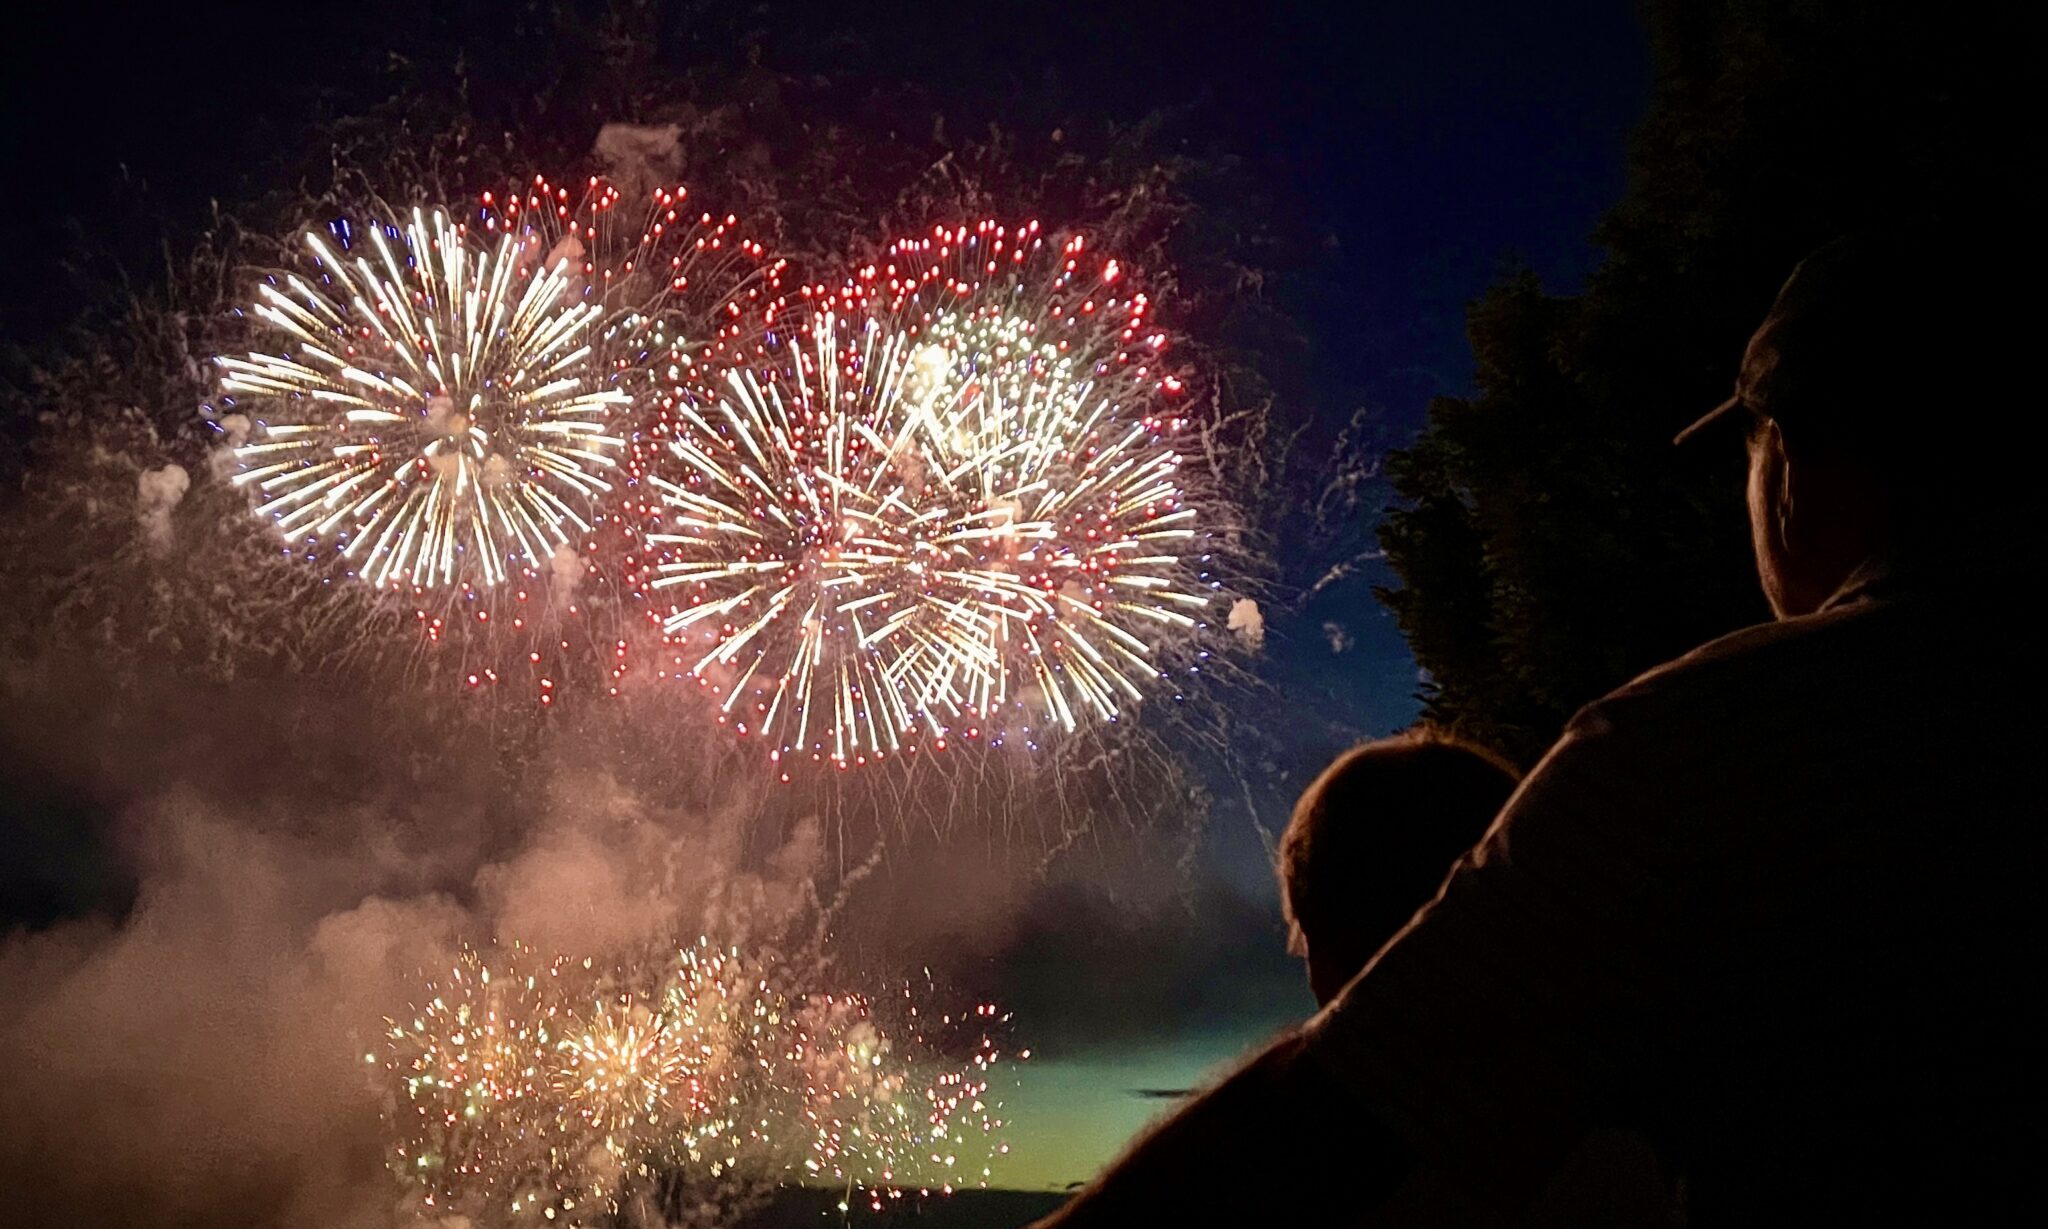 Fireworks explode in the sky while a man has his arm behind a shorter woman while both looking on. The light from the fireworks illuminate the sides of their heads and faces. 